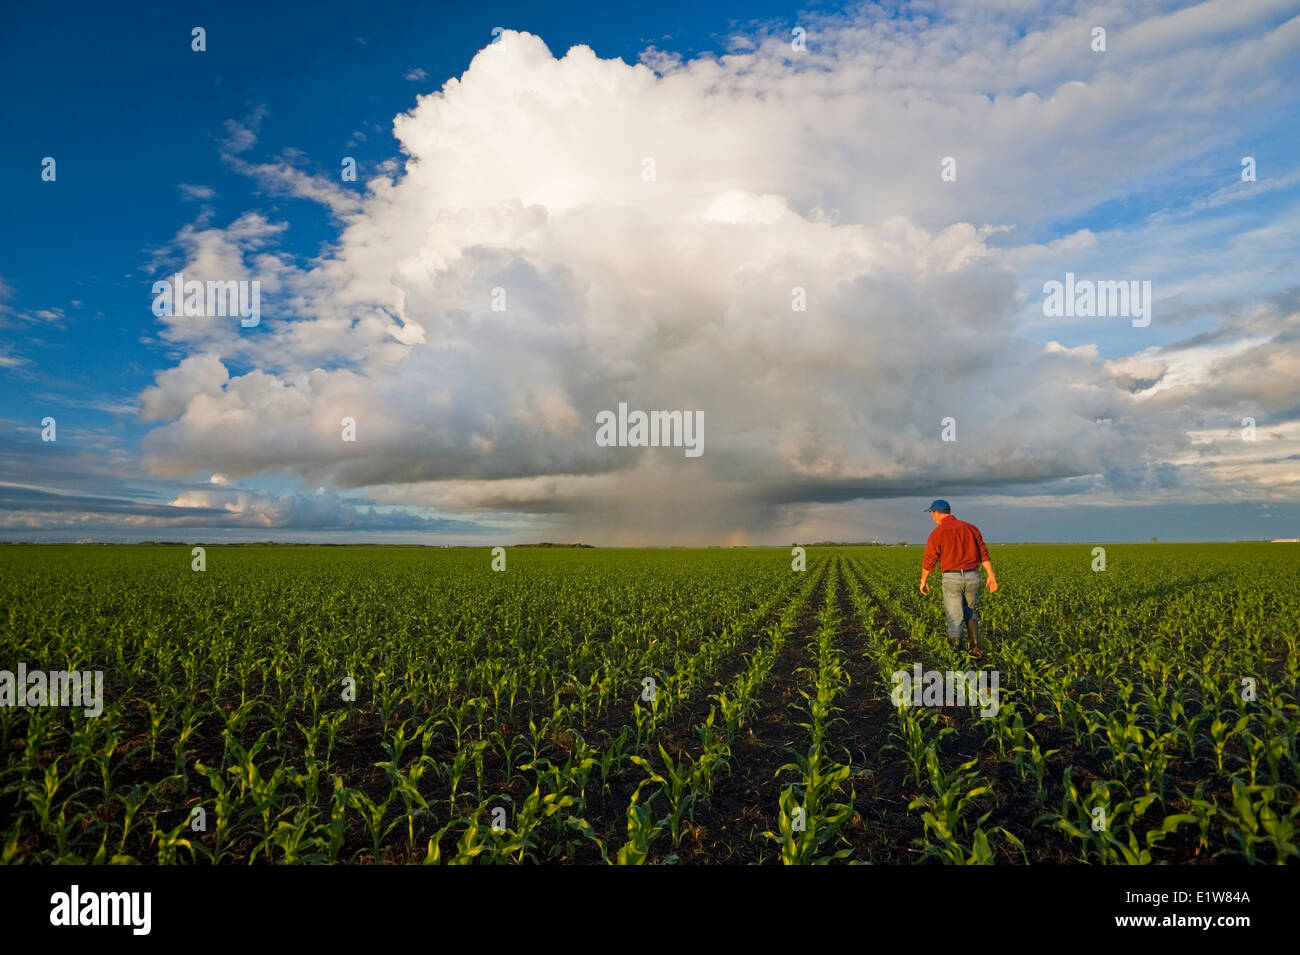 Farmer scouts a field early growth feed/grain corn sky containing a cumulonimbus cloud buildup in the background near Dufresne Stock Photo